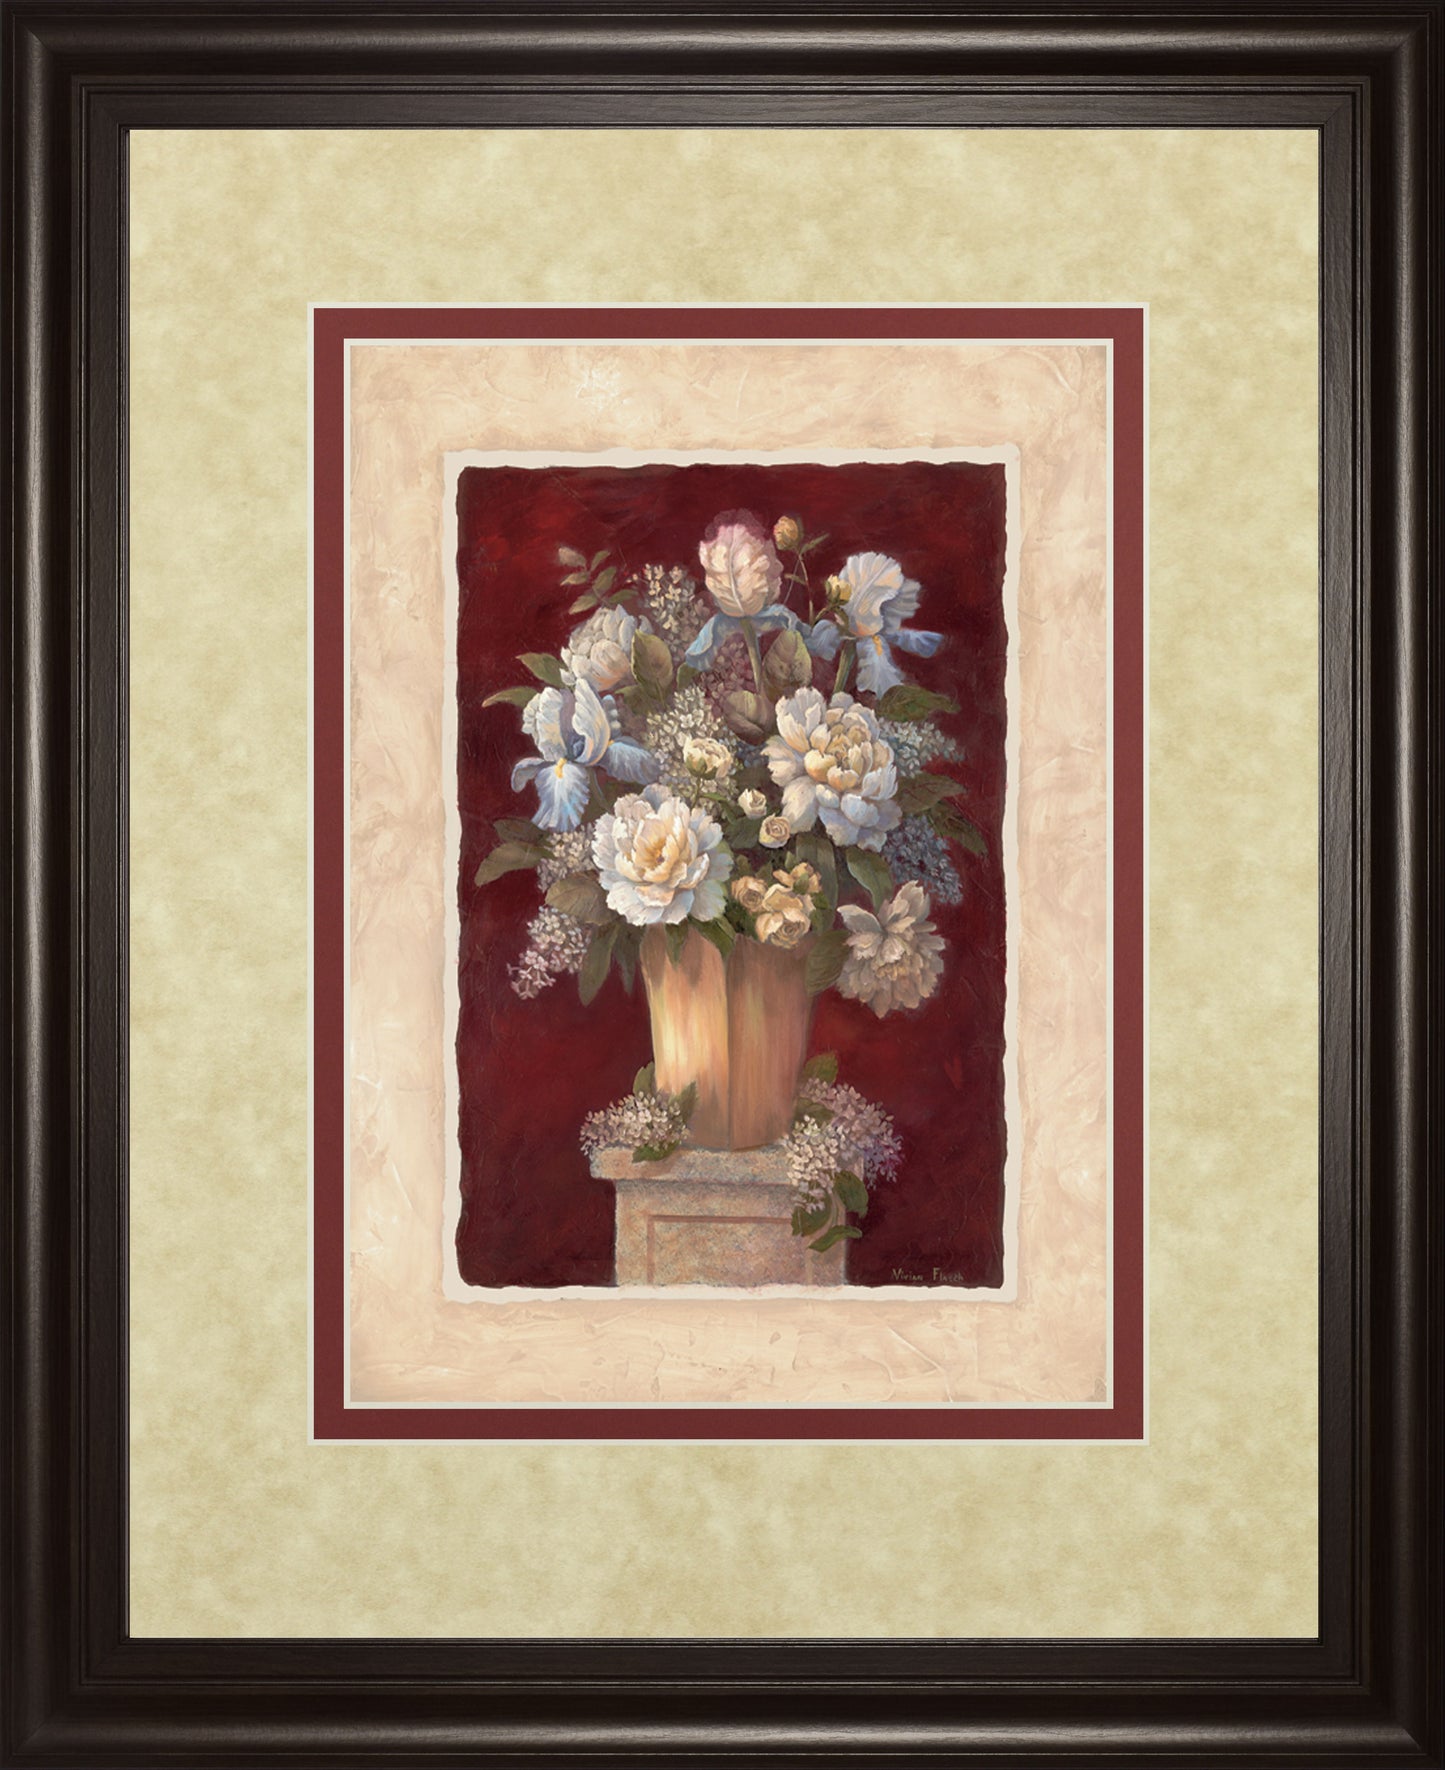 Traditional Red Il By Vivian Flasch - Framed Print Wall Art - Red